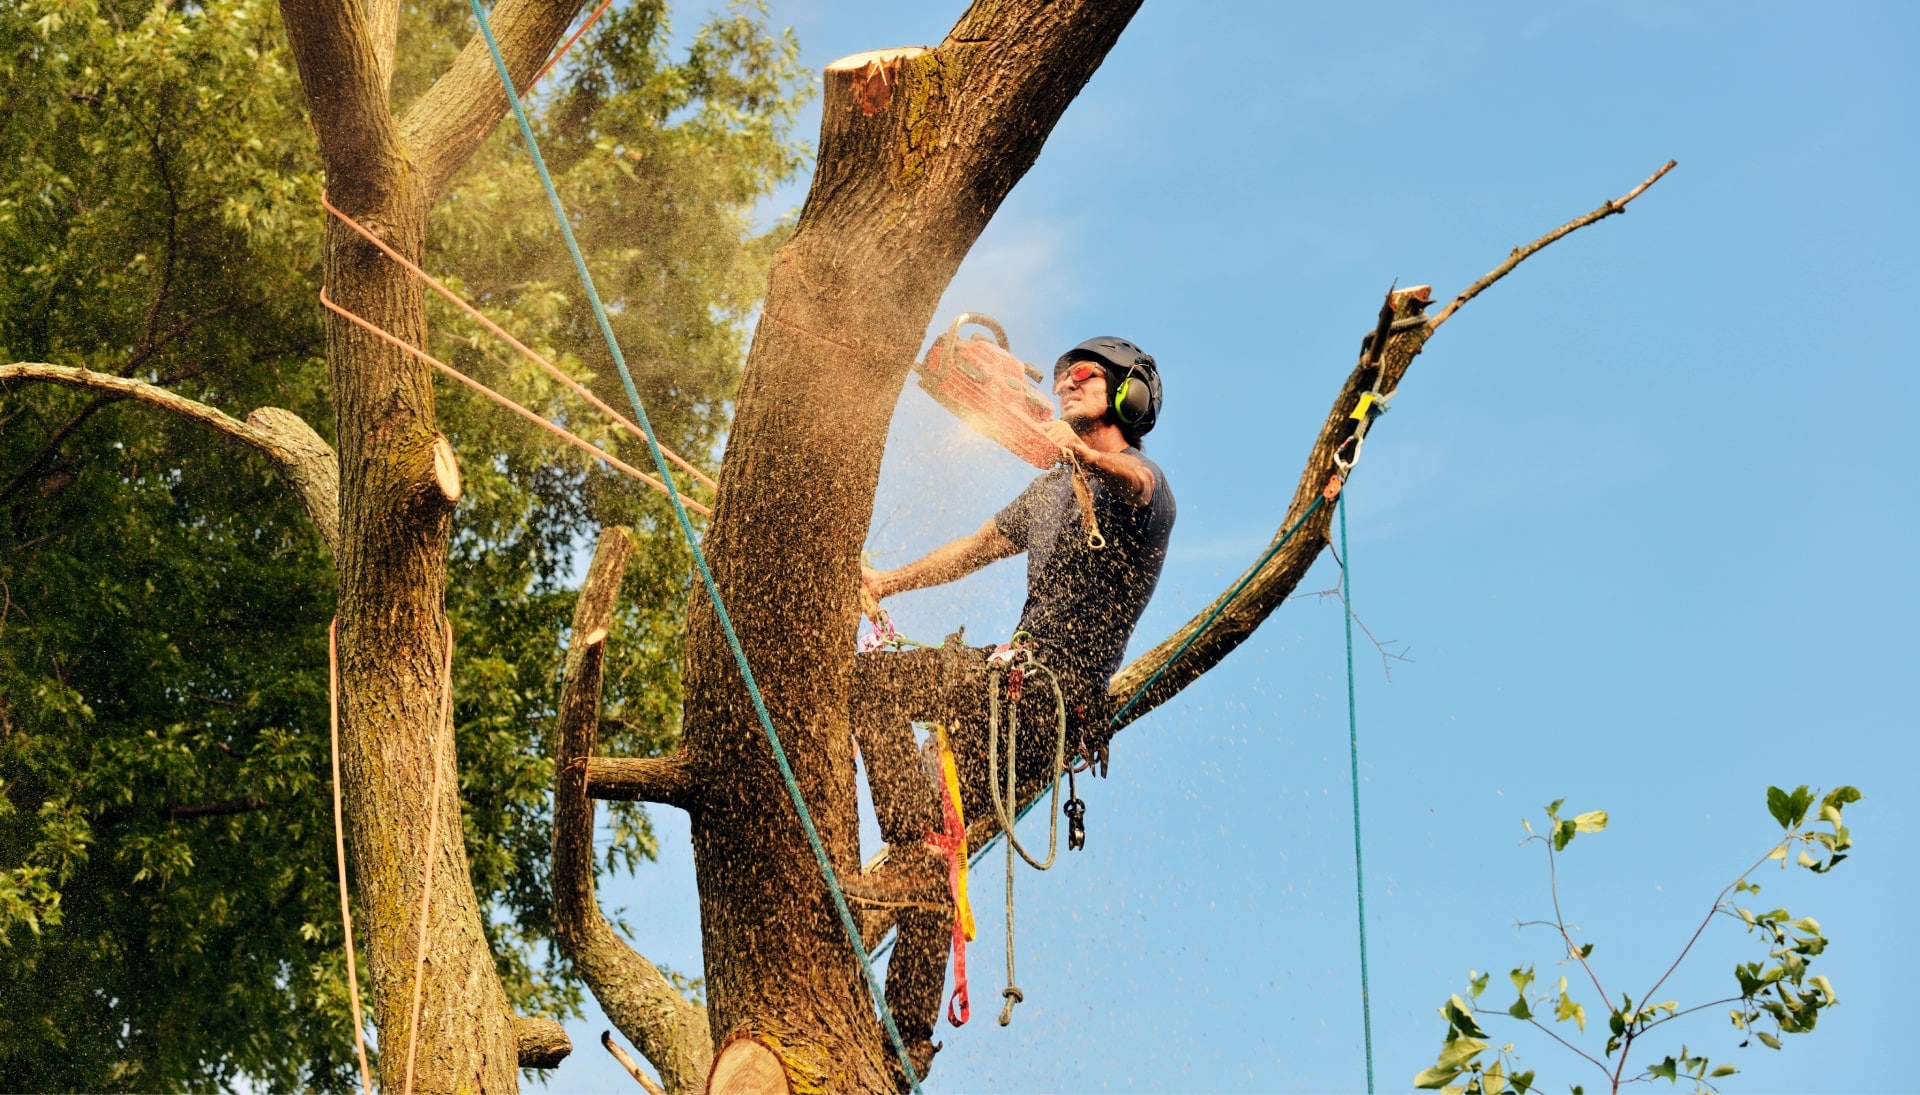 A tree removal expert in Chattanooga, Tennessee is chopping down a branch using an orange drill